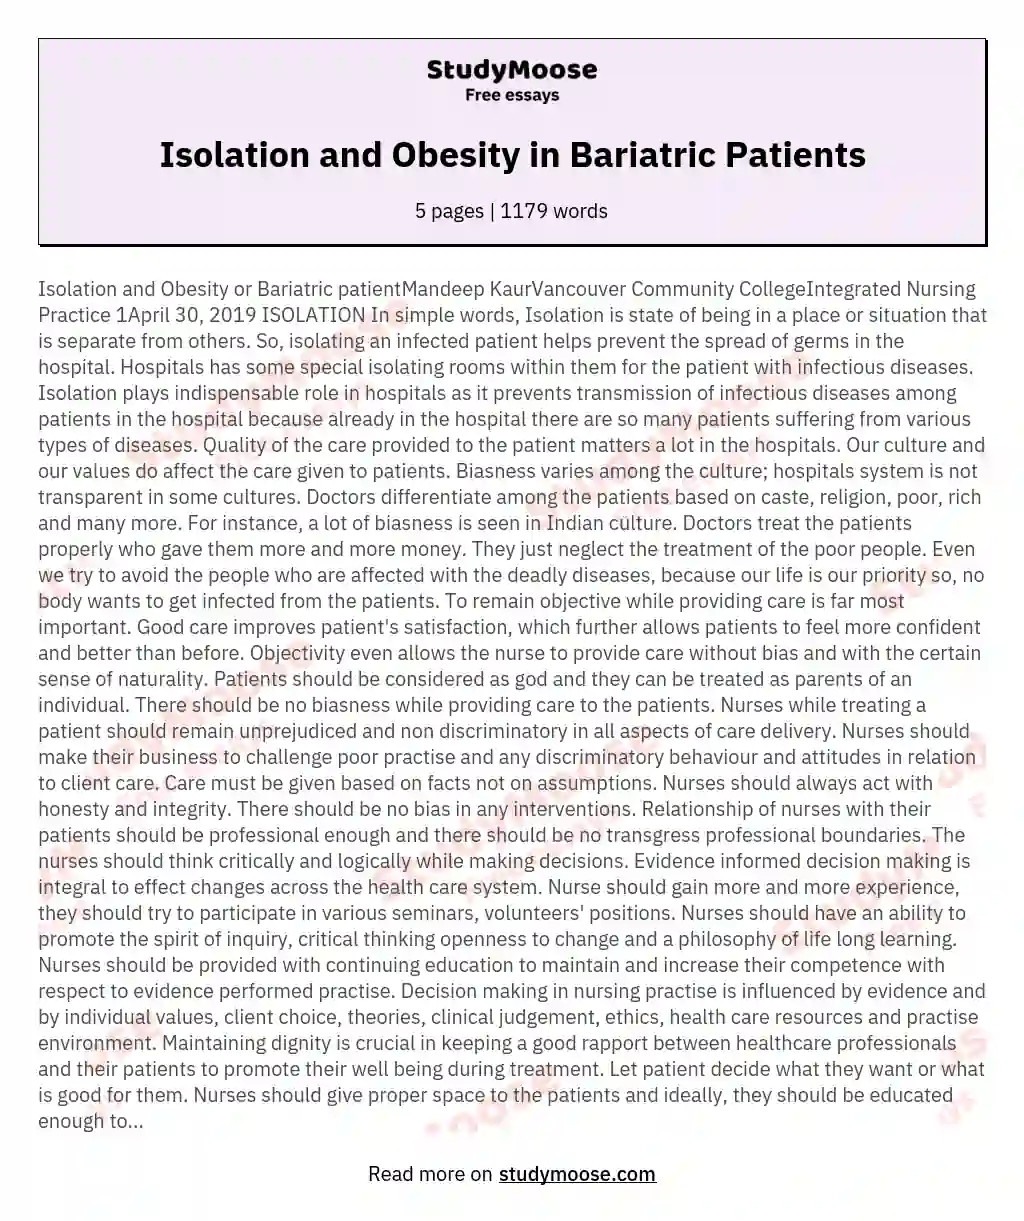 Isolation and Obesity in Bariatric Patients essay